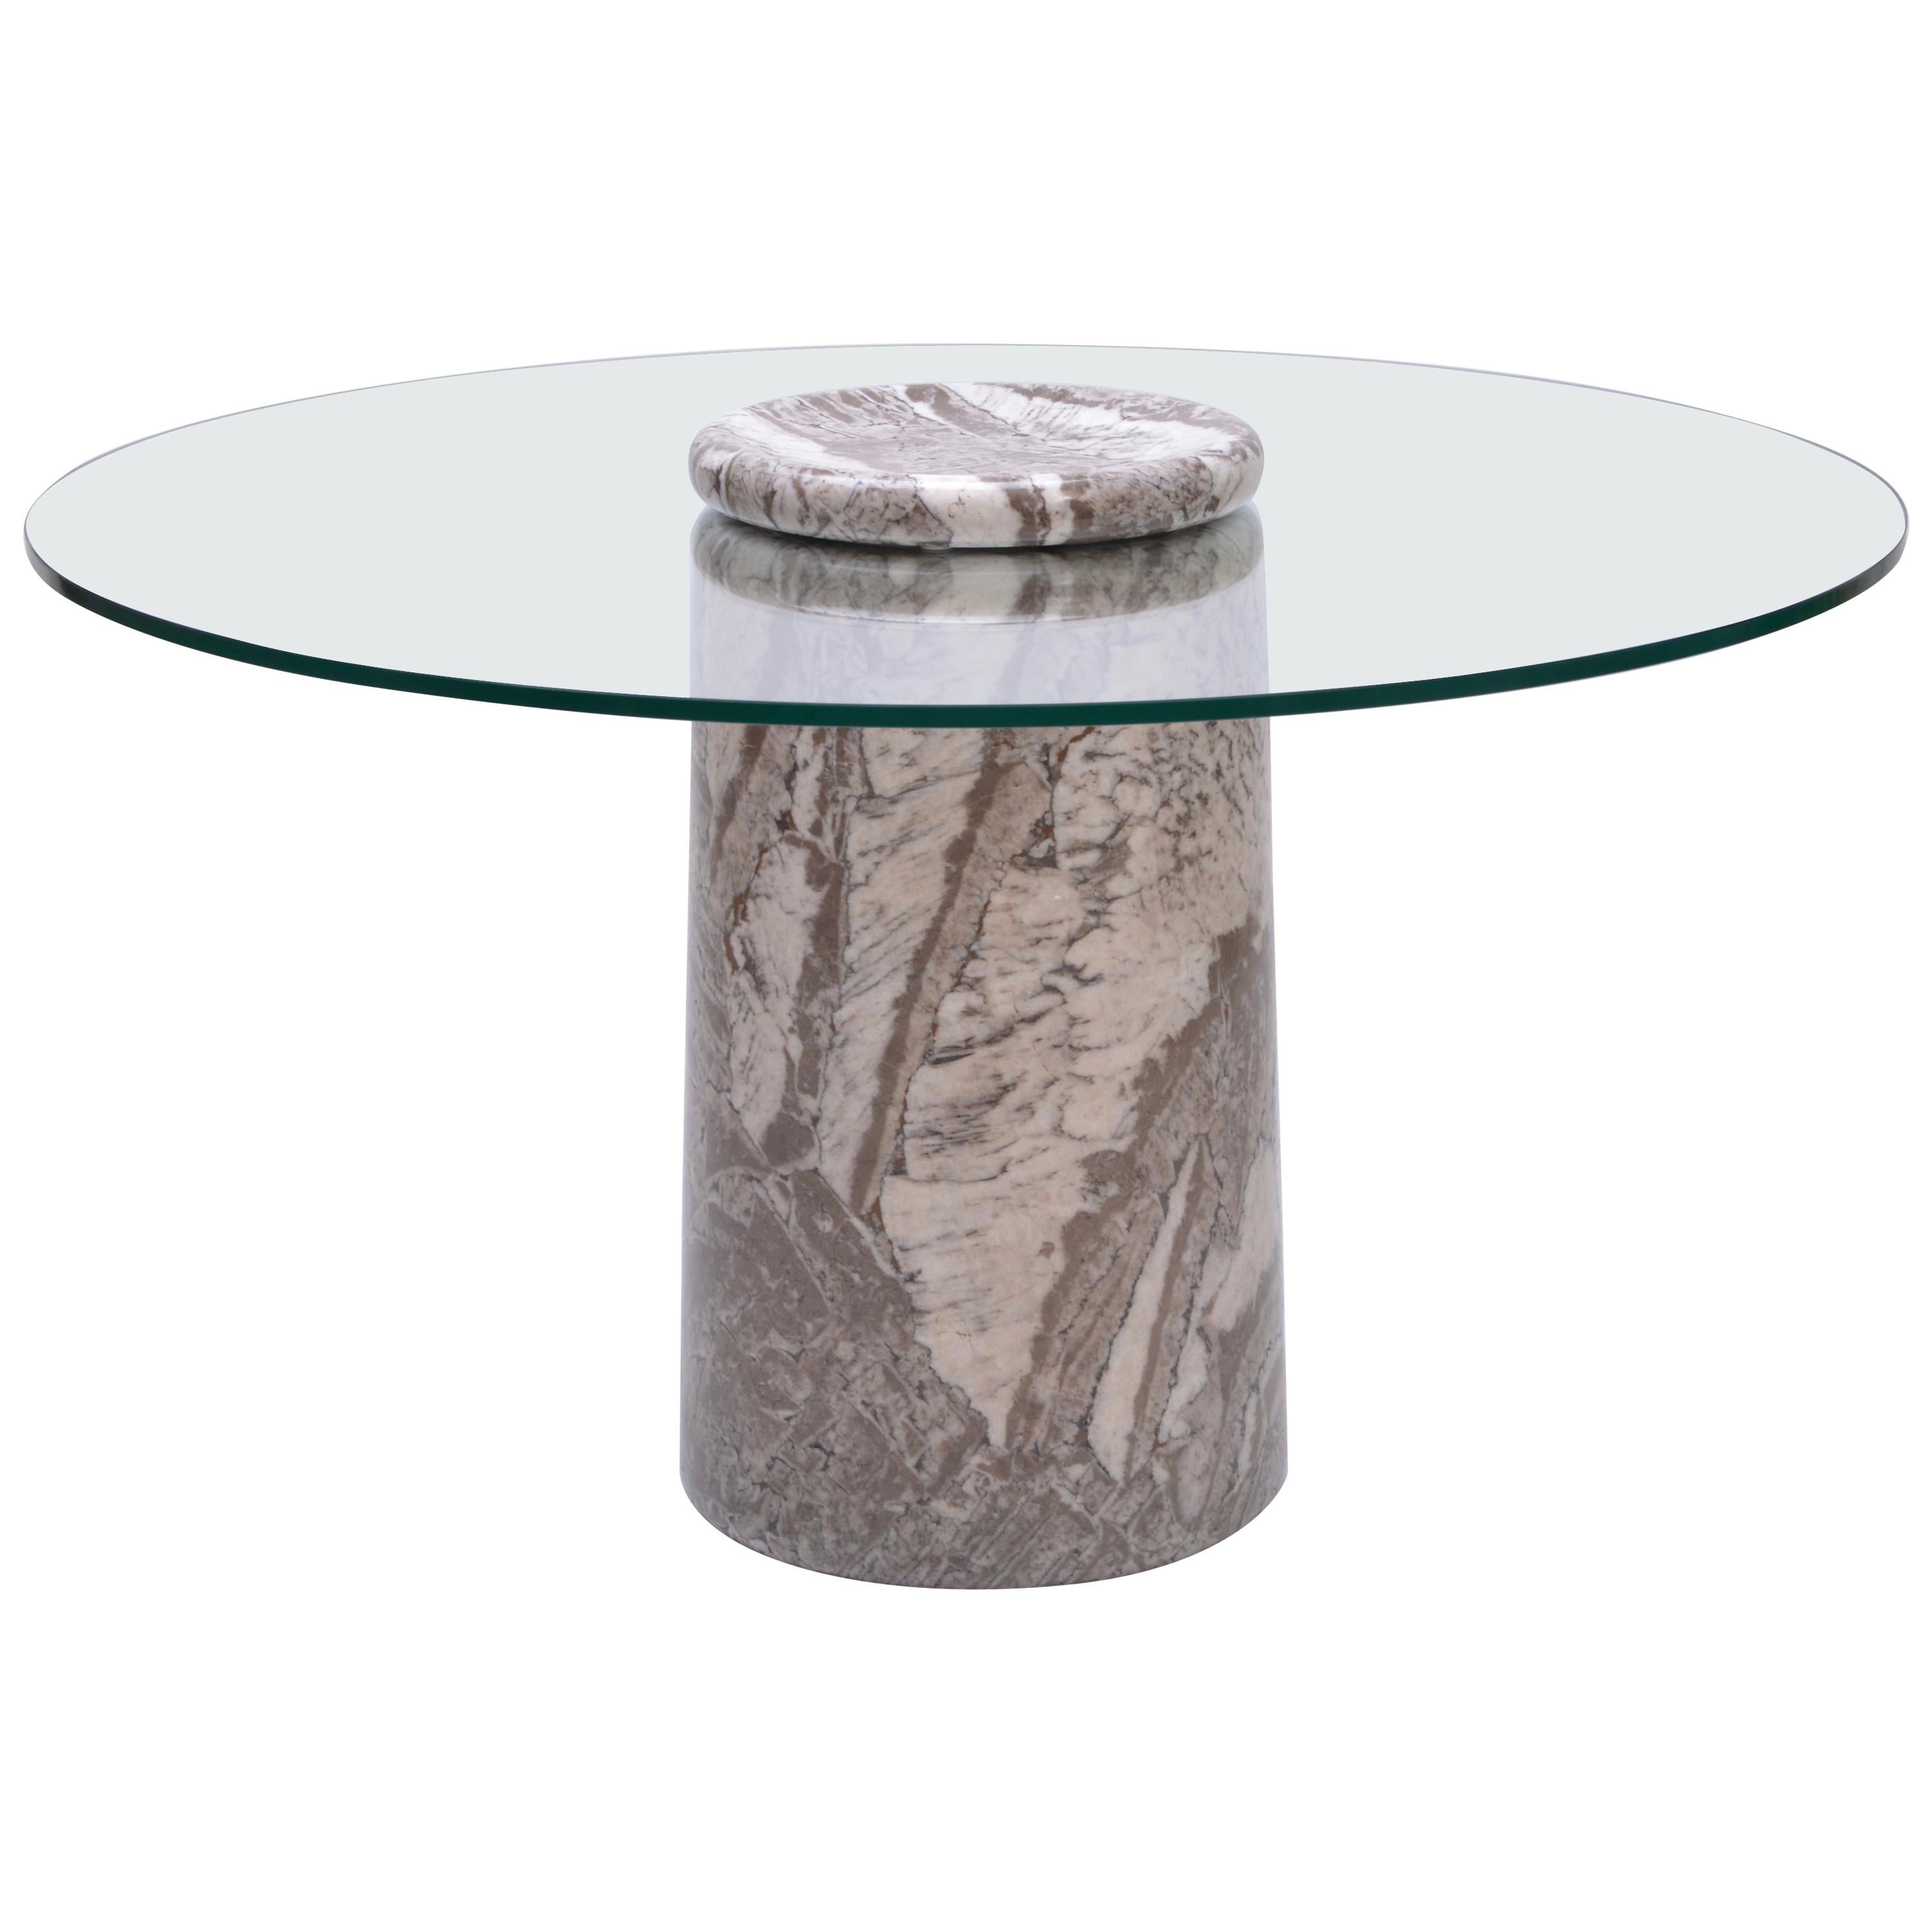 Angelo Mangiarotti Large Italian Marble Dining Table Model Castore, 1975 For Sale